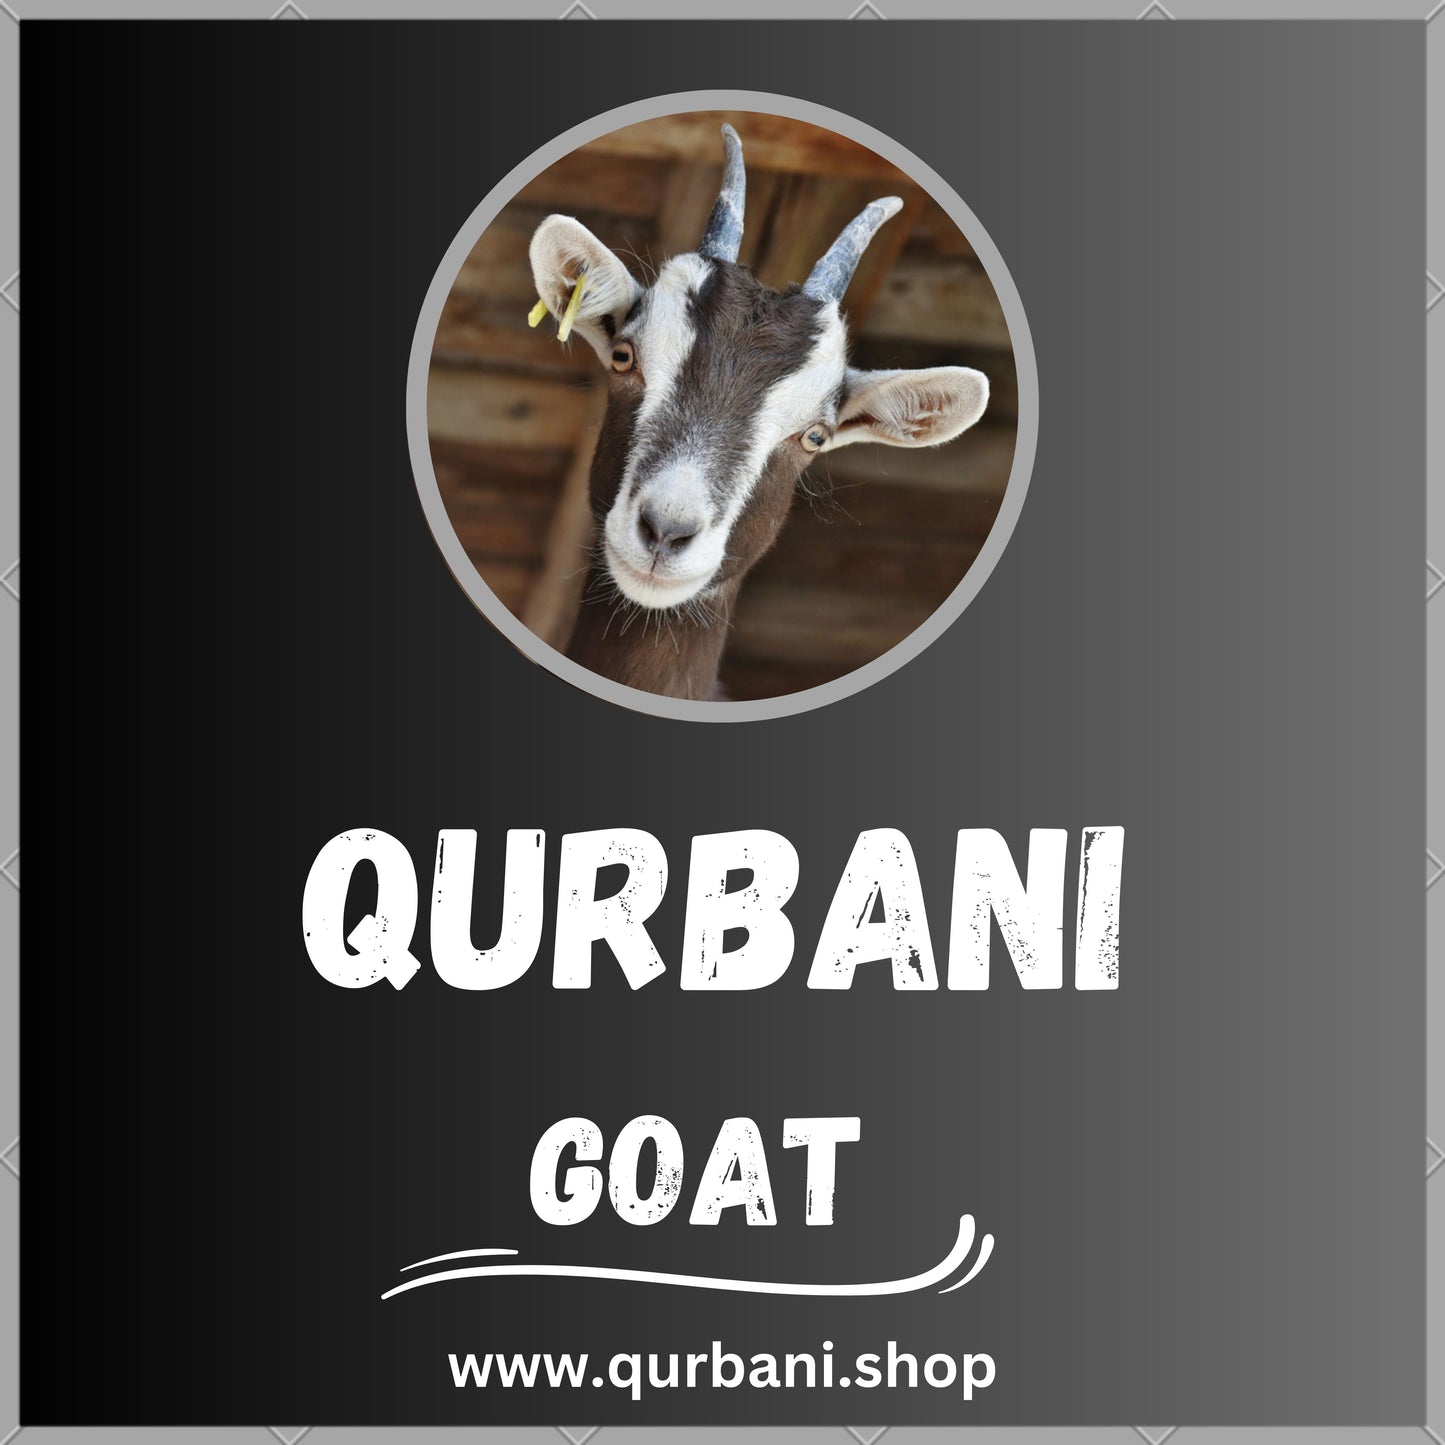 Trusted Qurbani Services in Portland - Order Your Eid Sacrifice Today!